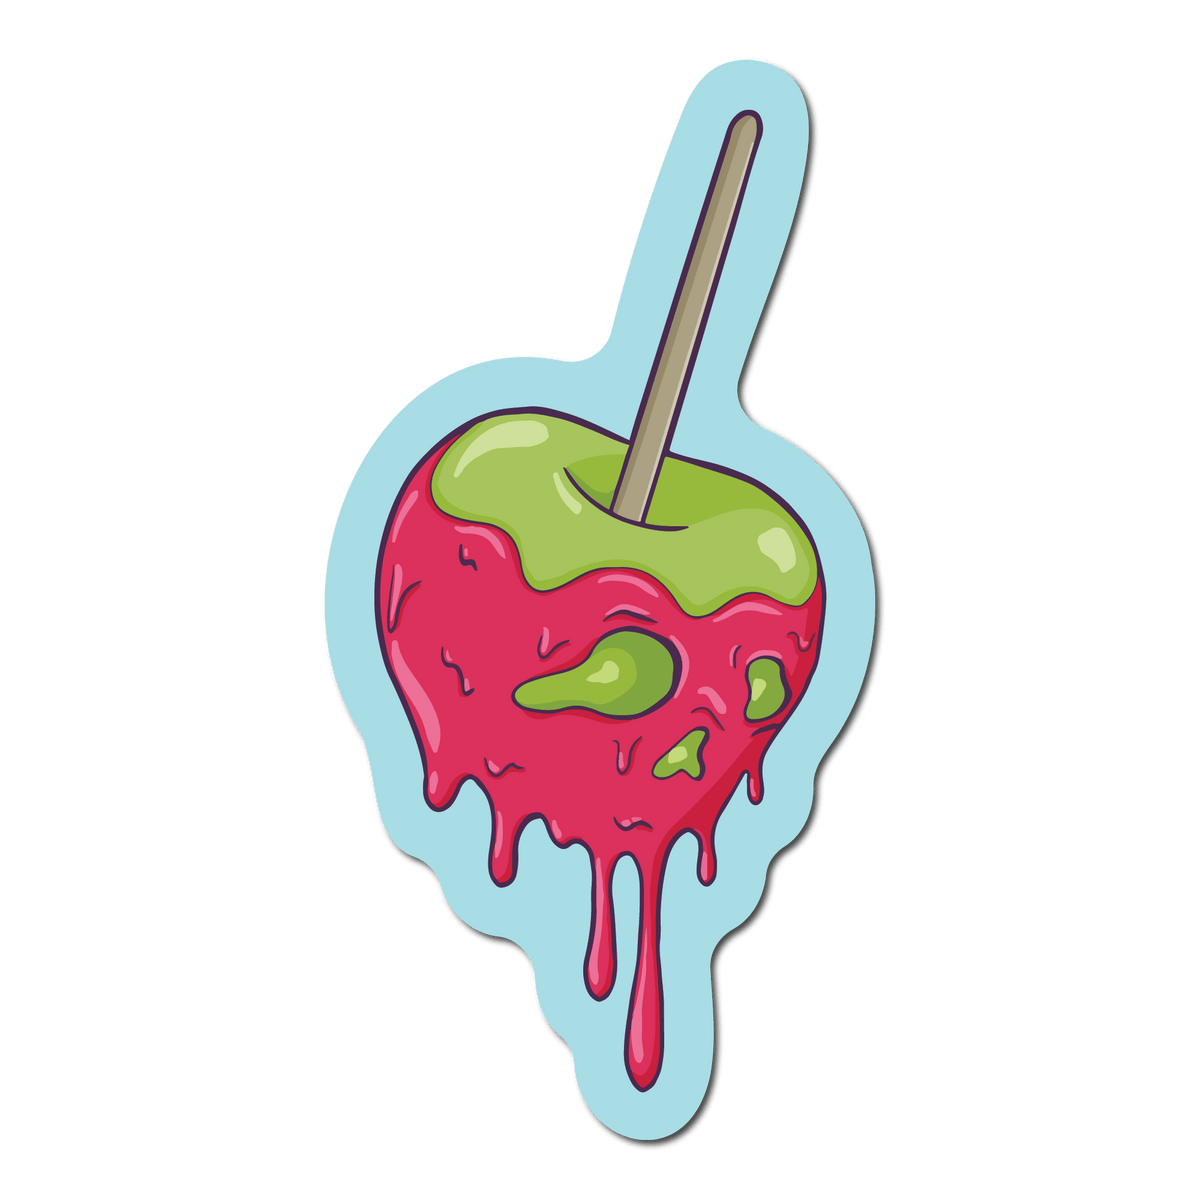 Small Sticker of a spooky apple with dripping goo that forms a face 